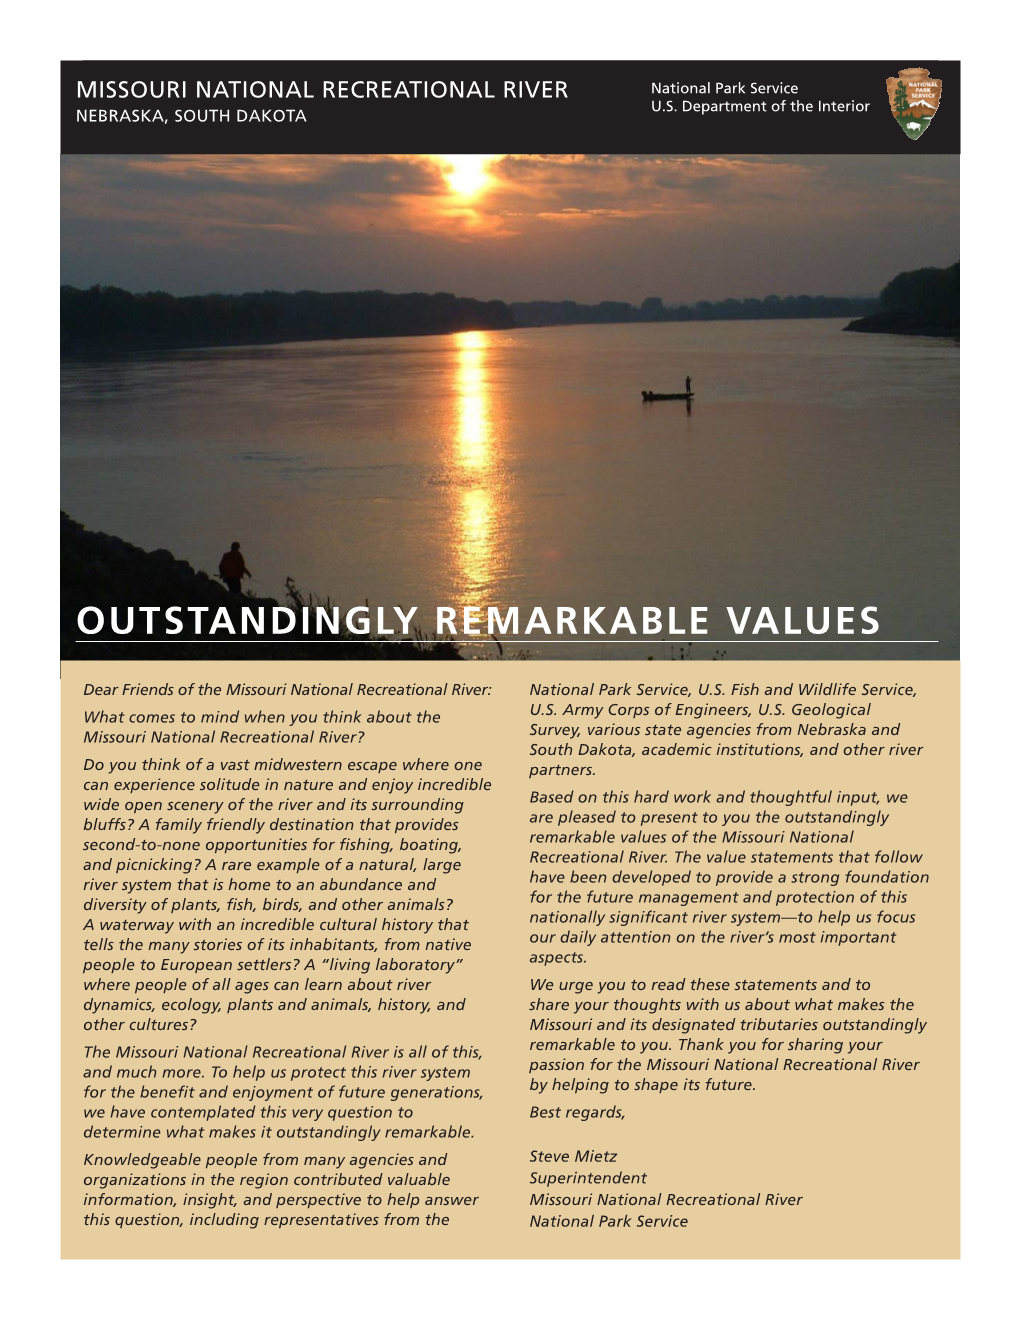 Outstandingly Remarkable Values